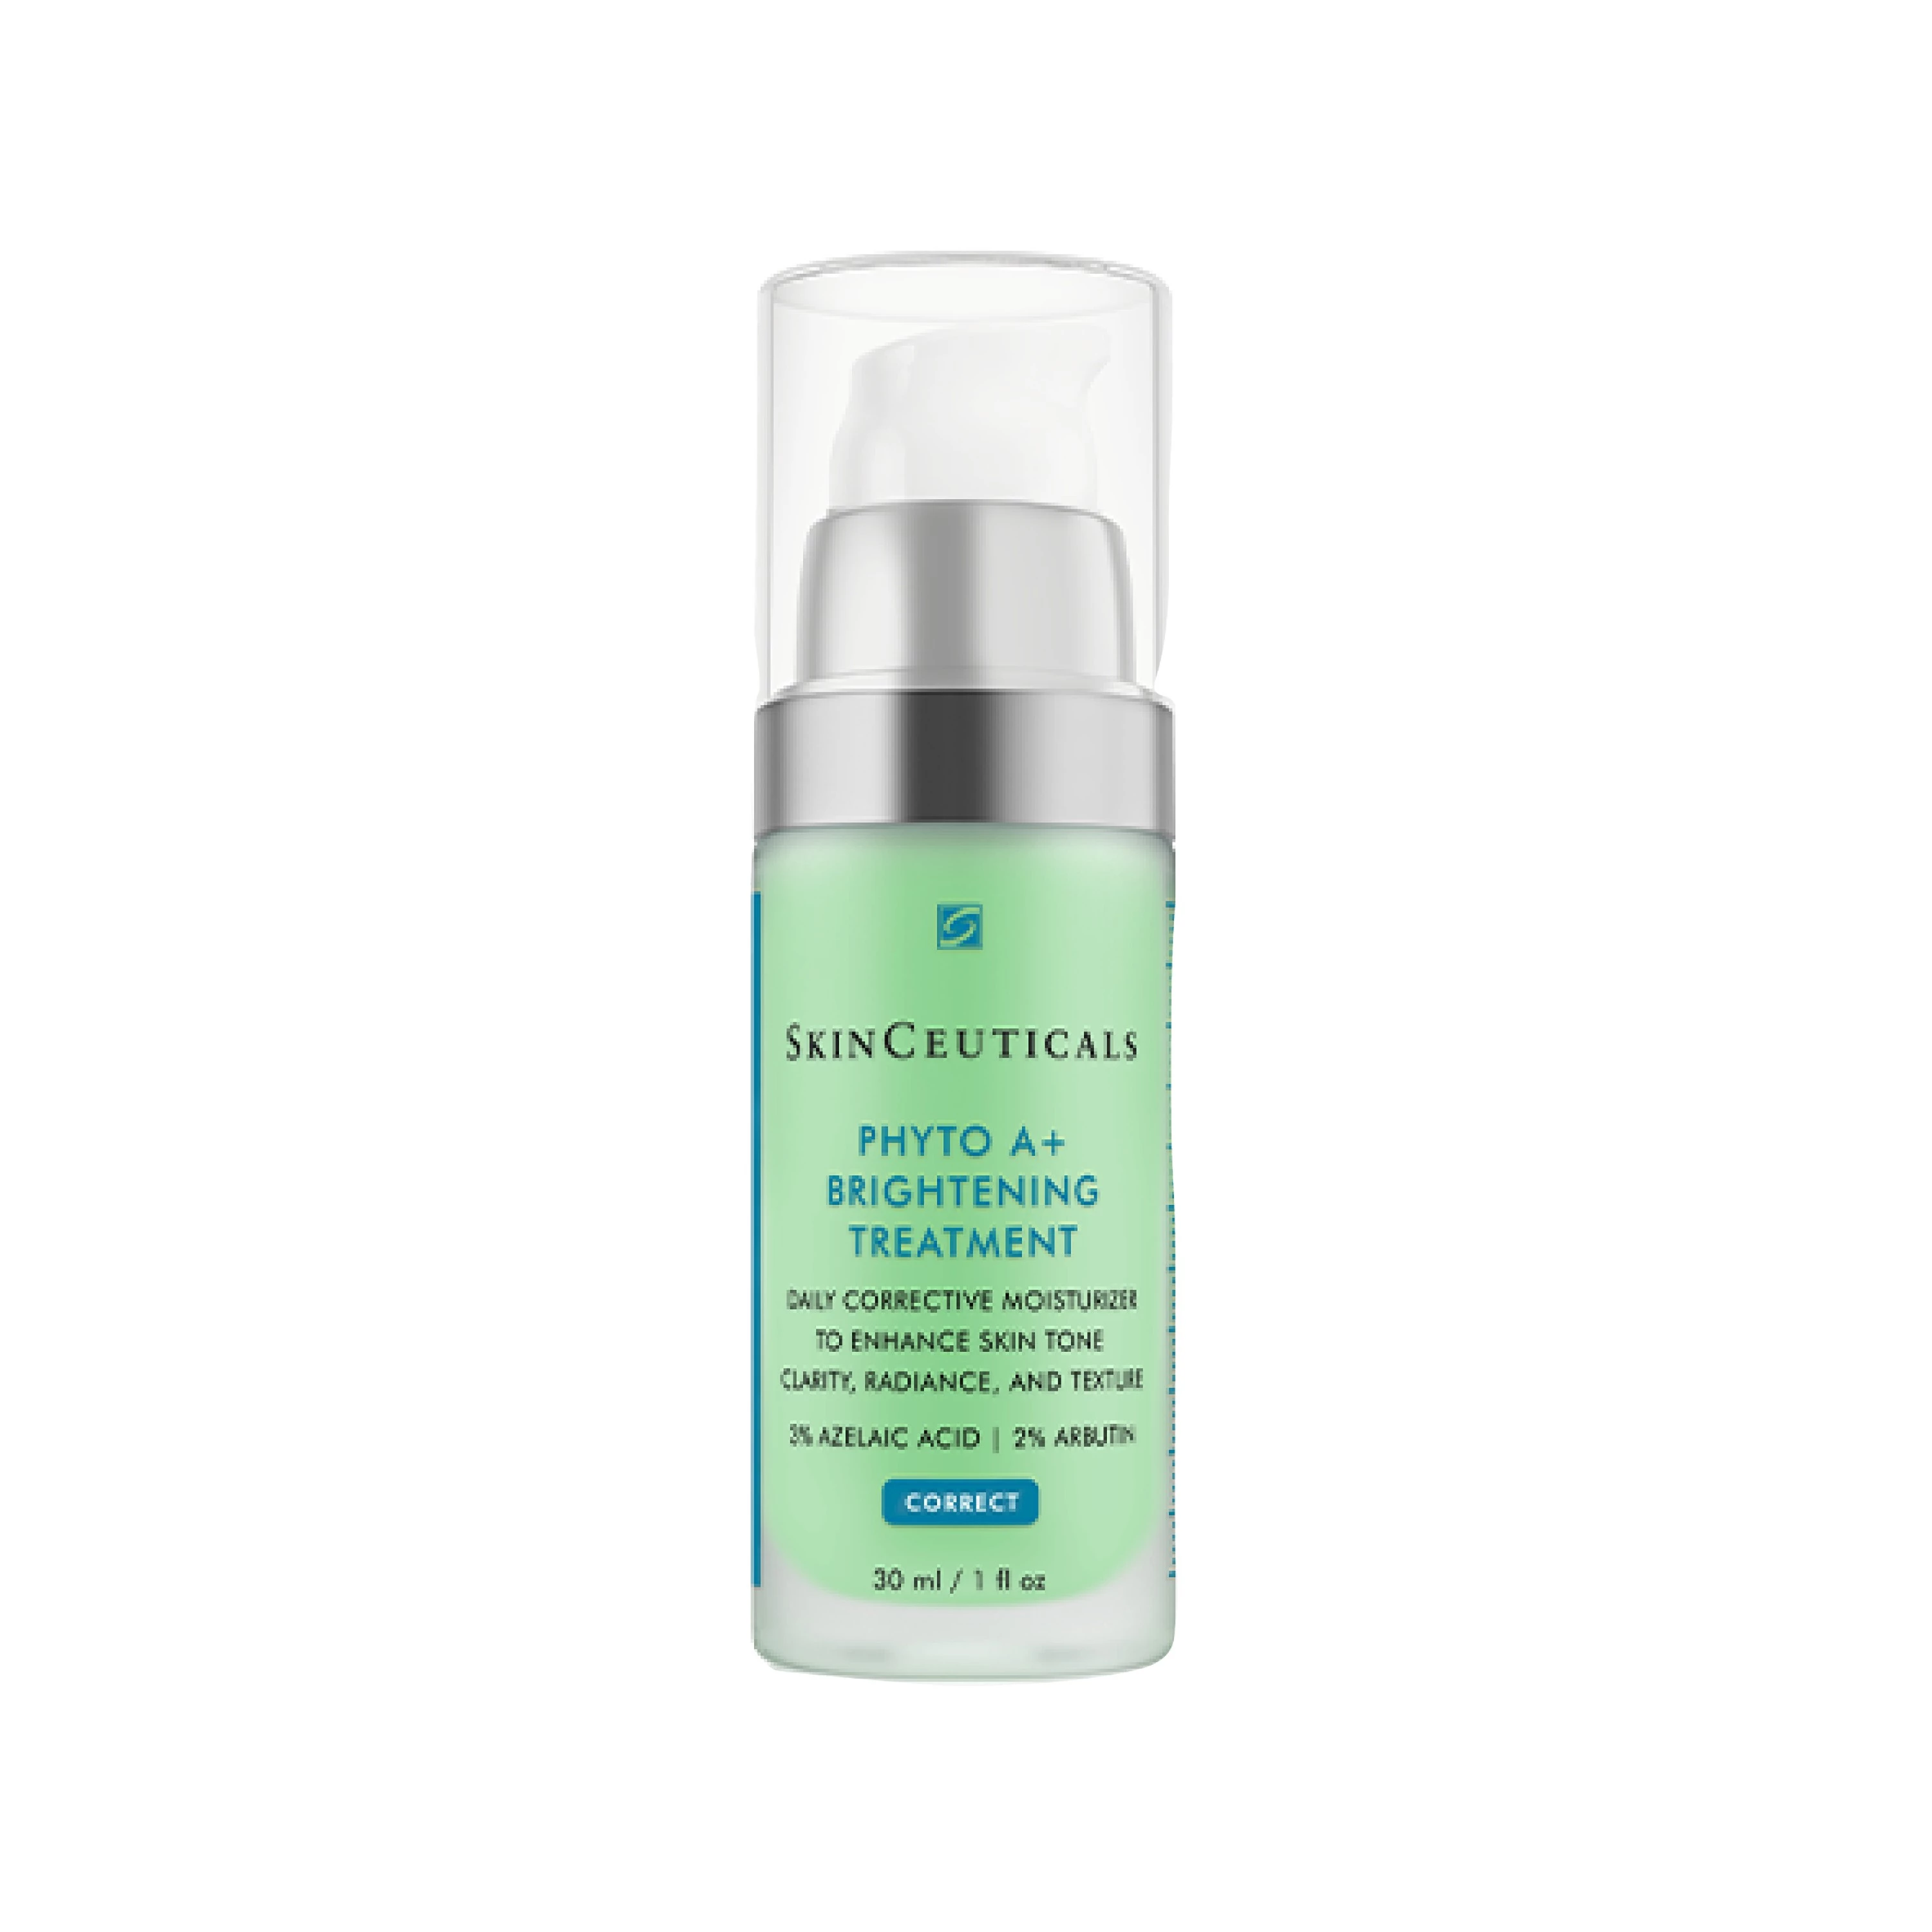 Skinceuticals Phyto A+ brightening treatment, 30 ml